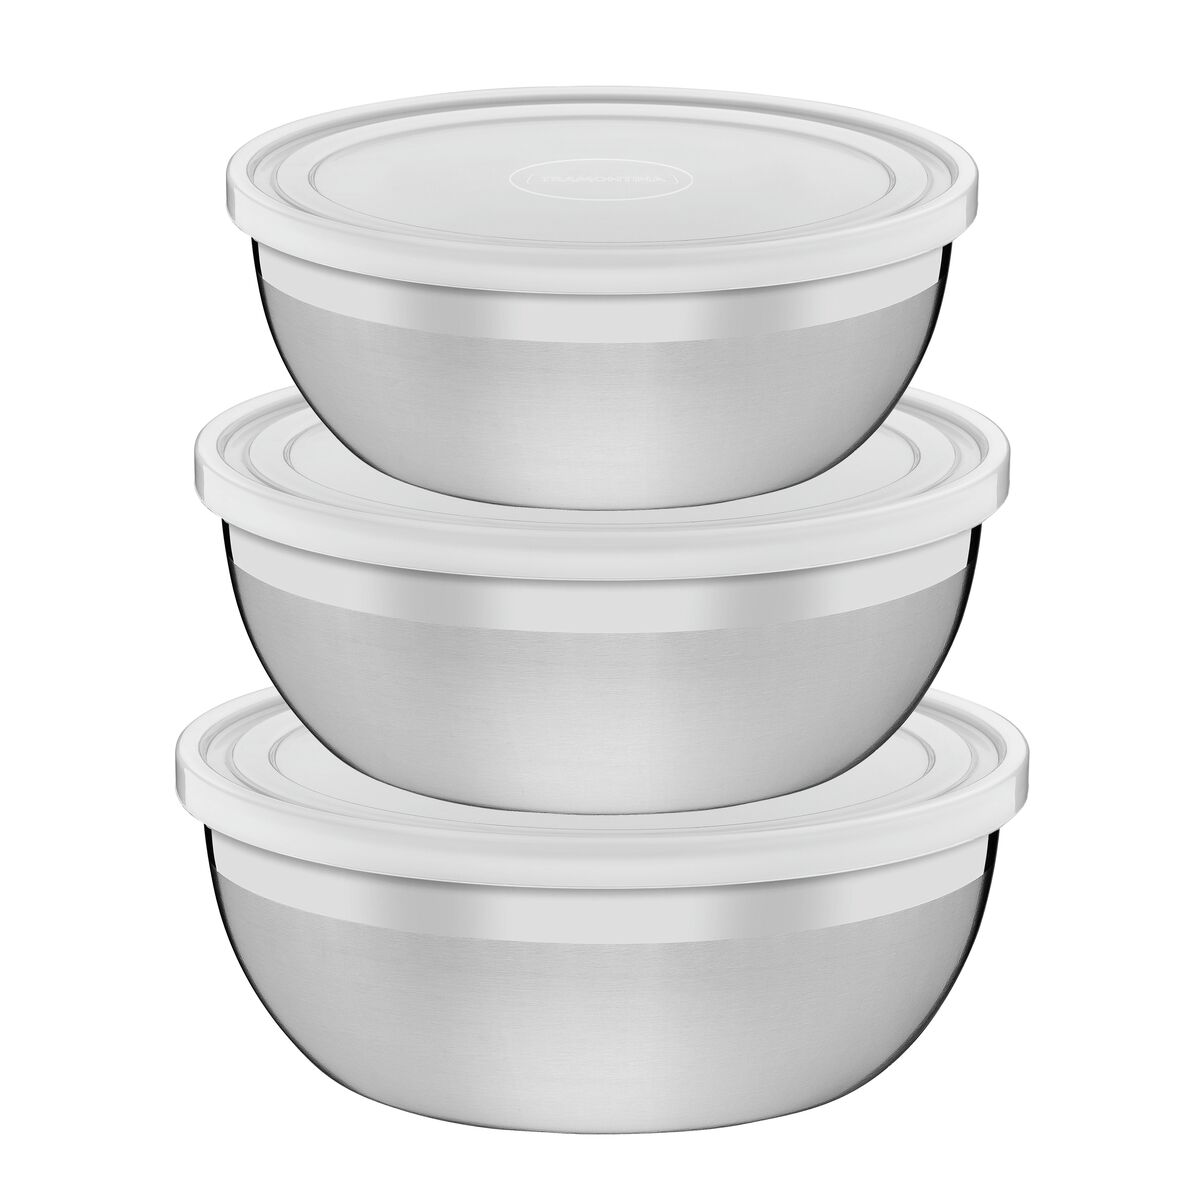 Tramontina Freezinox stainless steel container set with plastic lids, 3 pieces